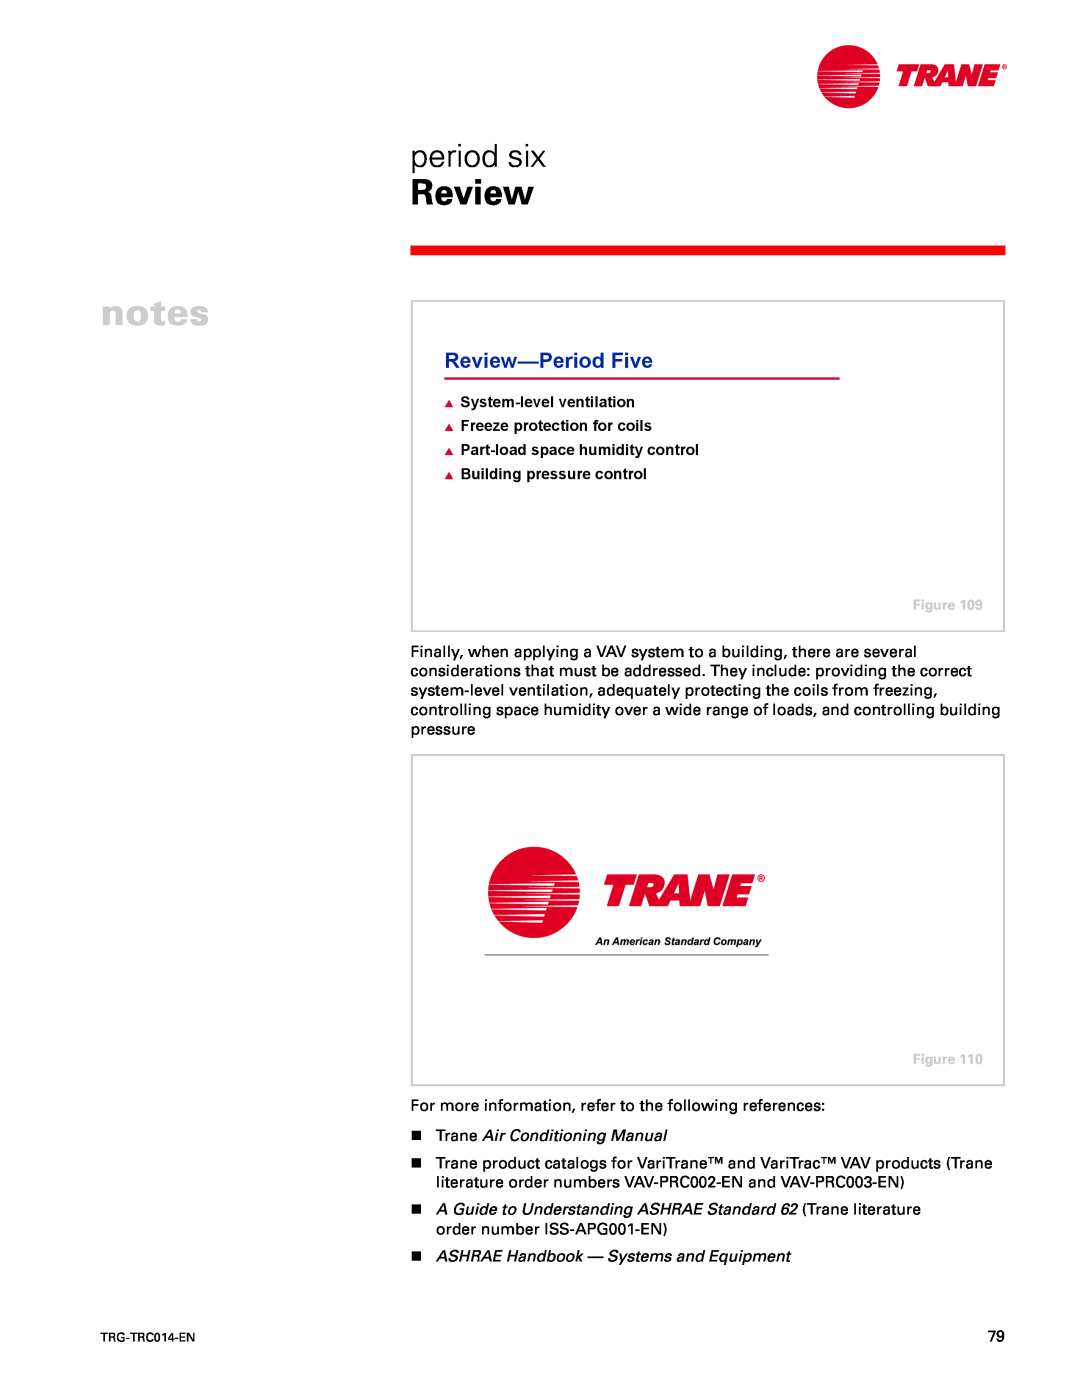 Trane TRG-TRC014-EN manual Review-PeriodFive, period six, System-levelventilation, Freeze protection for coils 